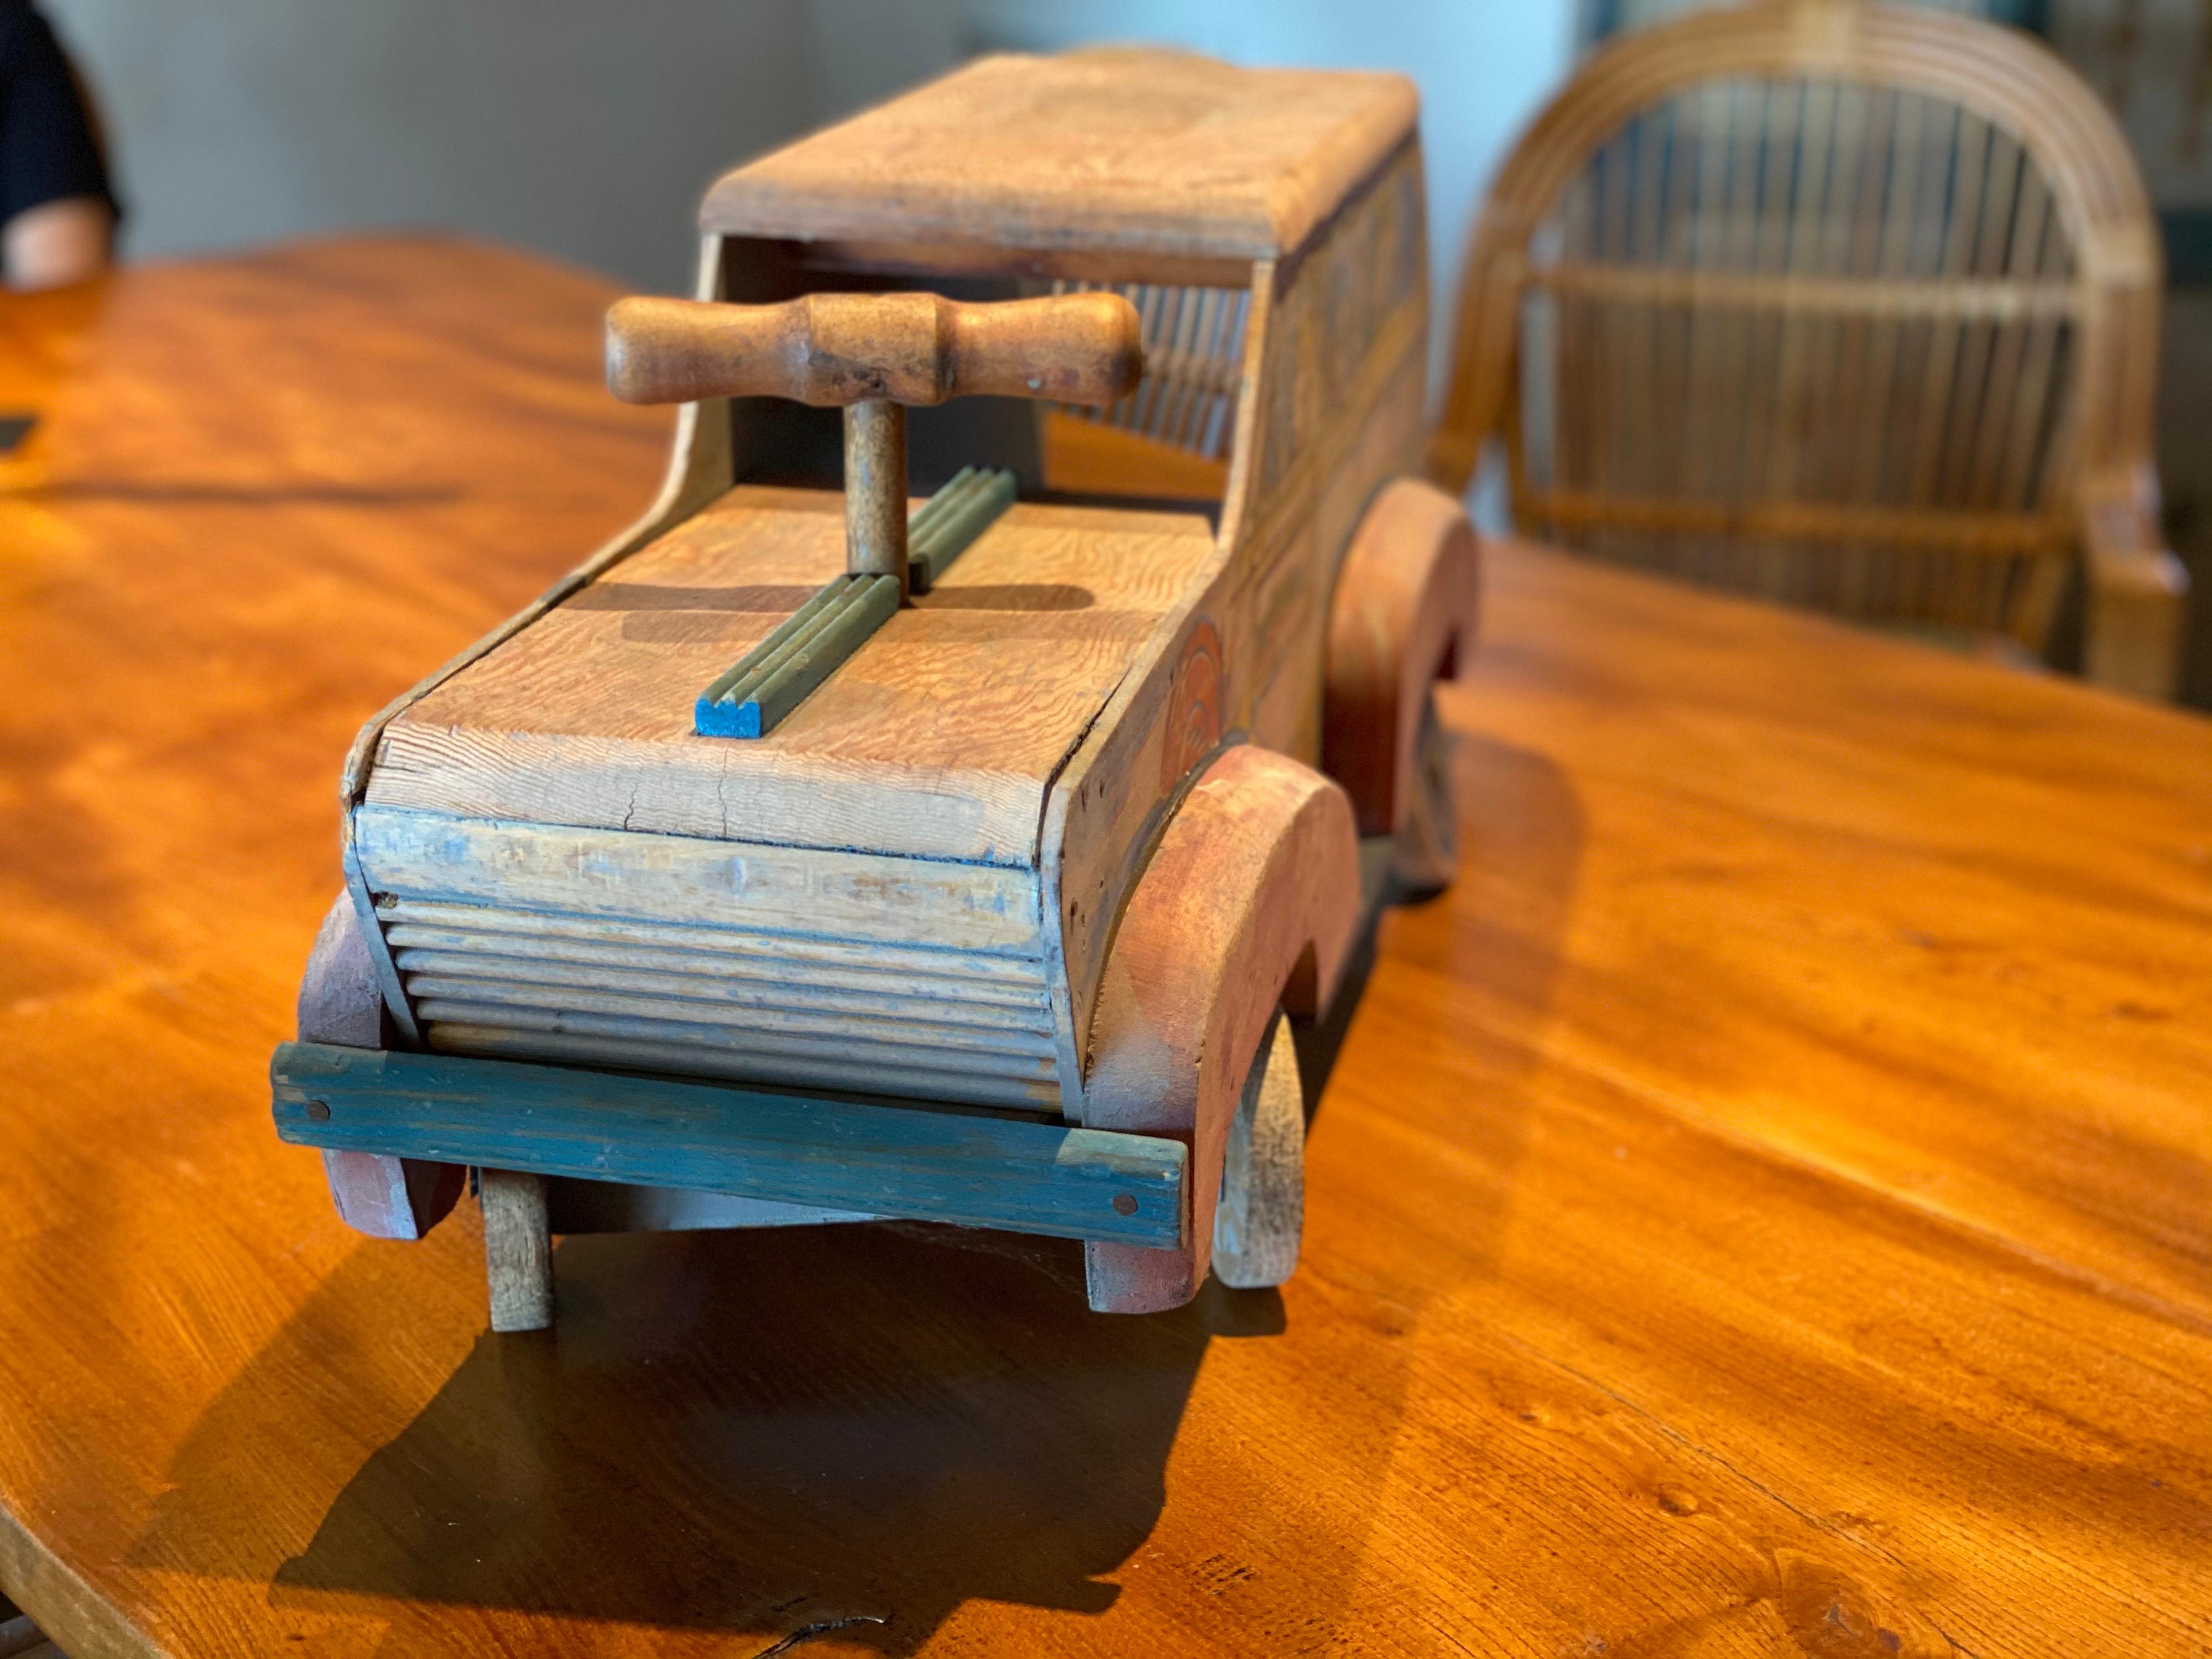 Painted and Carved Toy 'Woody' Car, circa 1930s-1940s 3